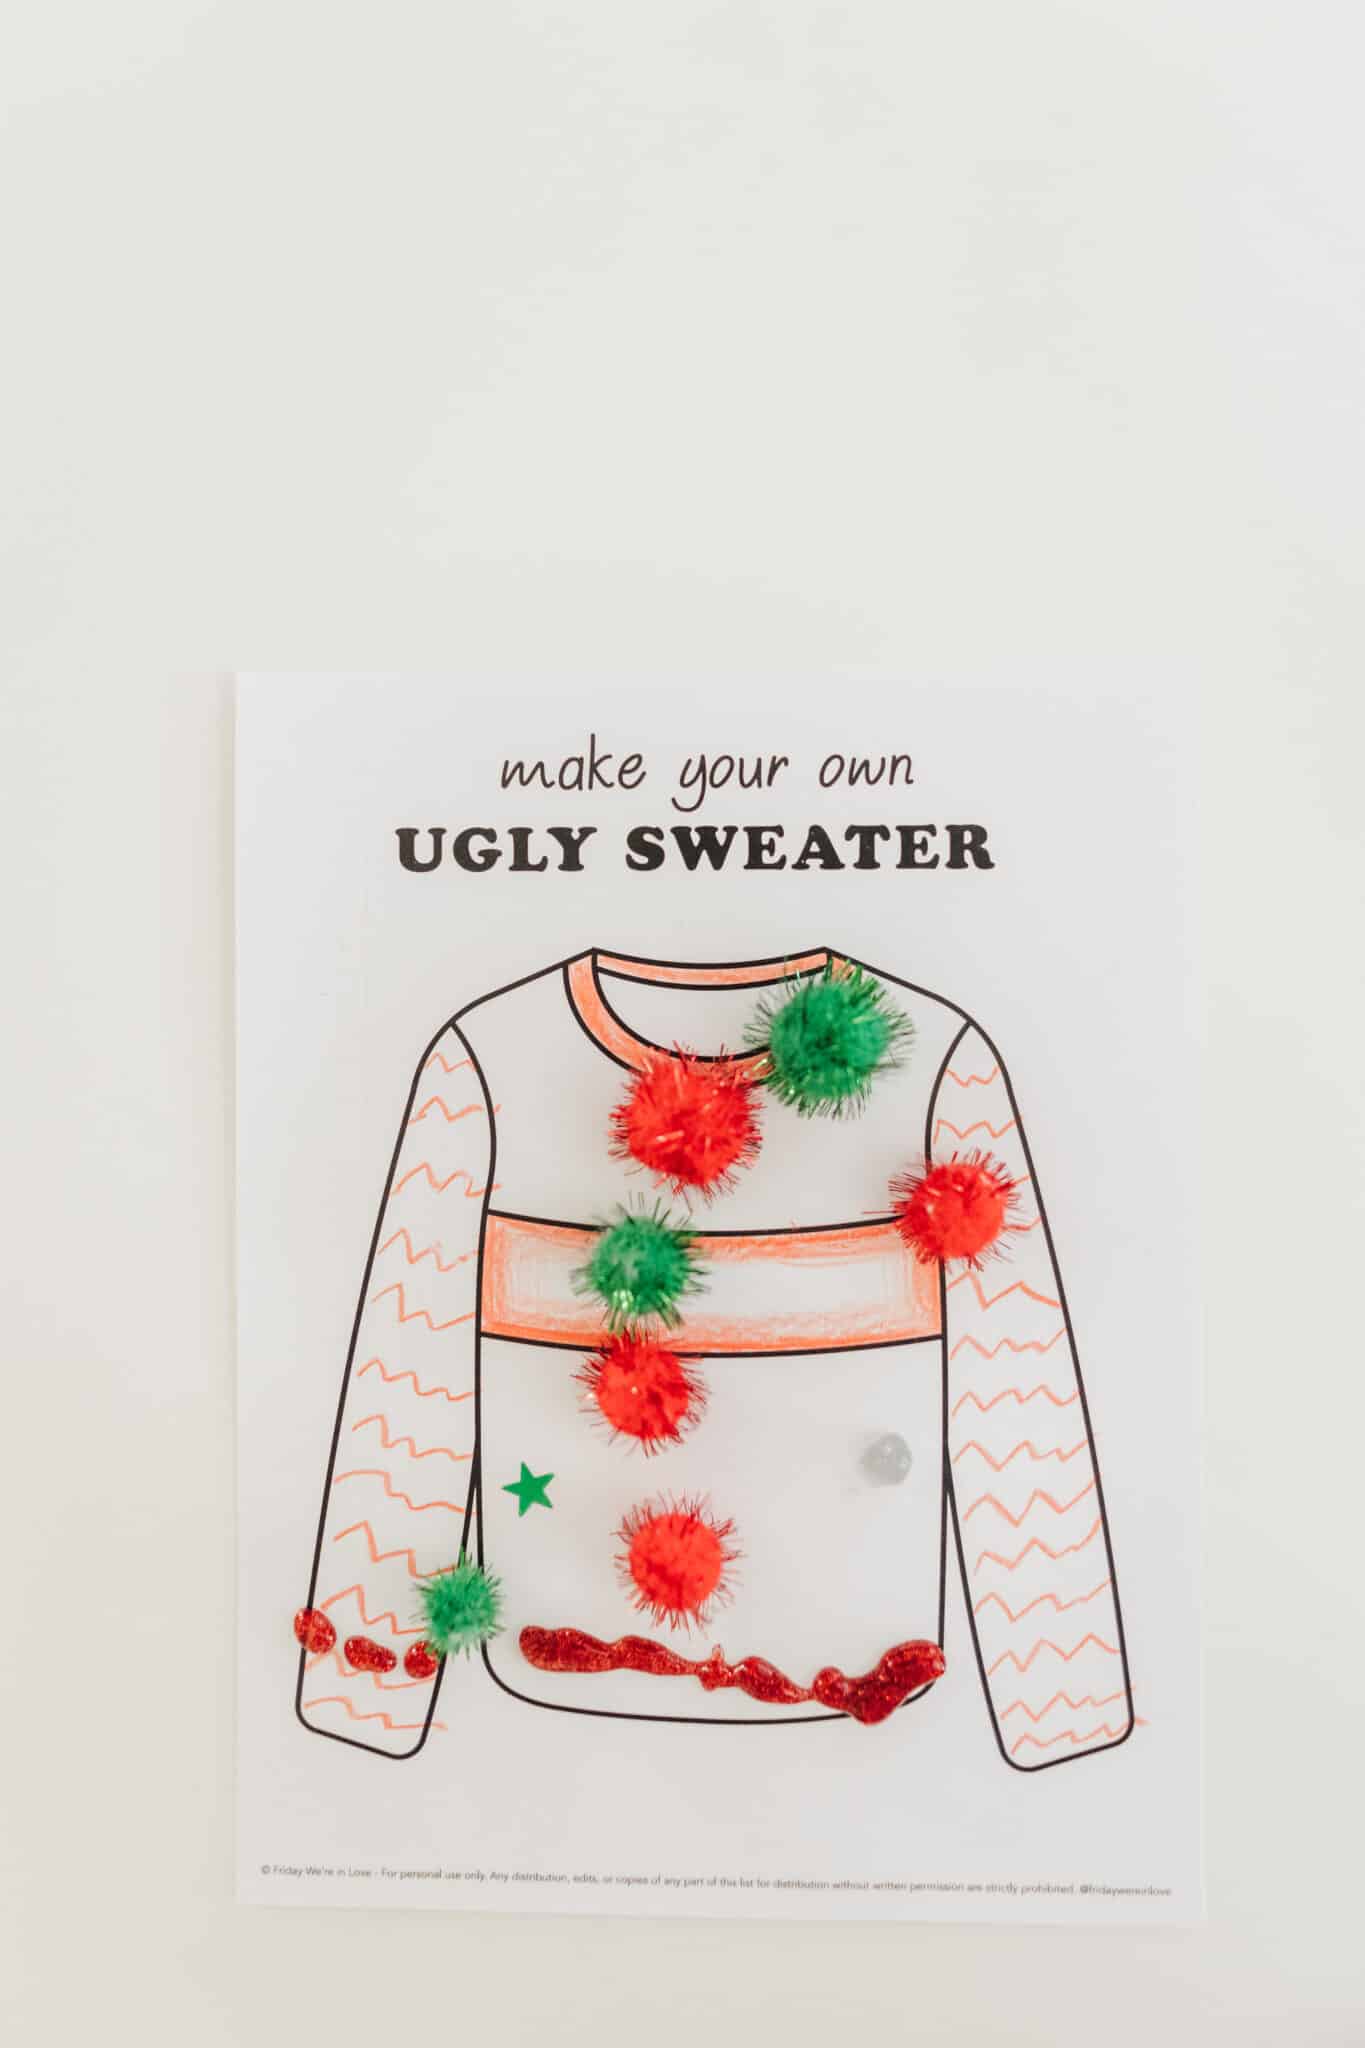 Example of Ugly Sweater craft ideas with free ugly sweater template. 